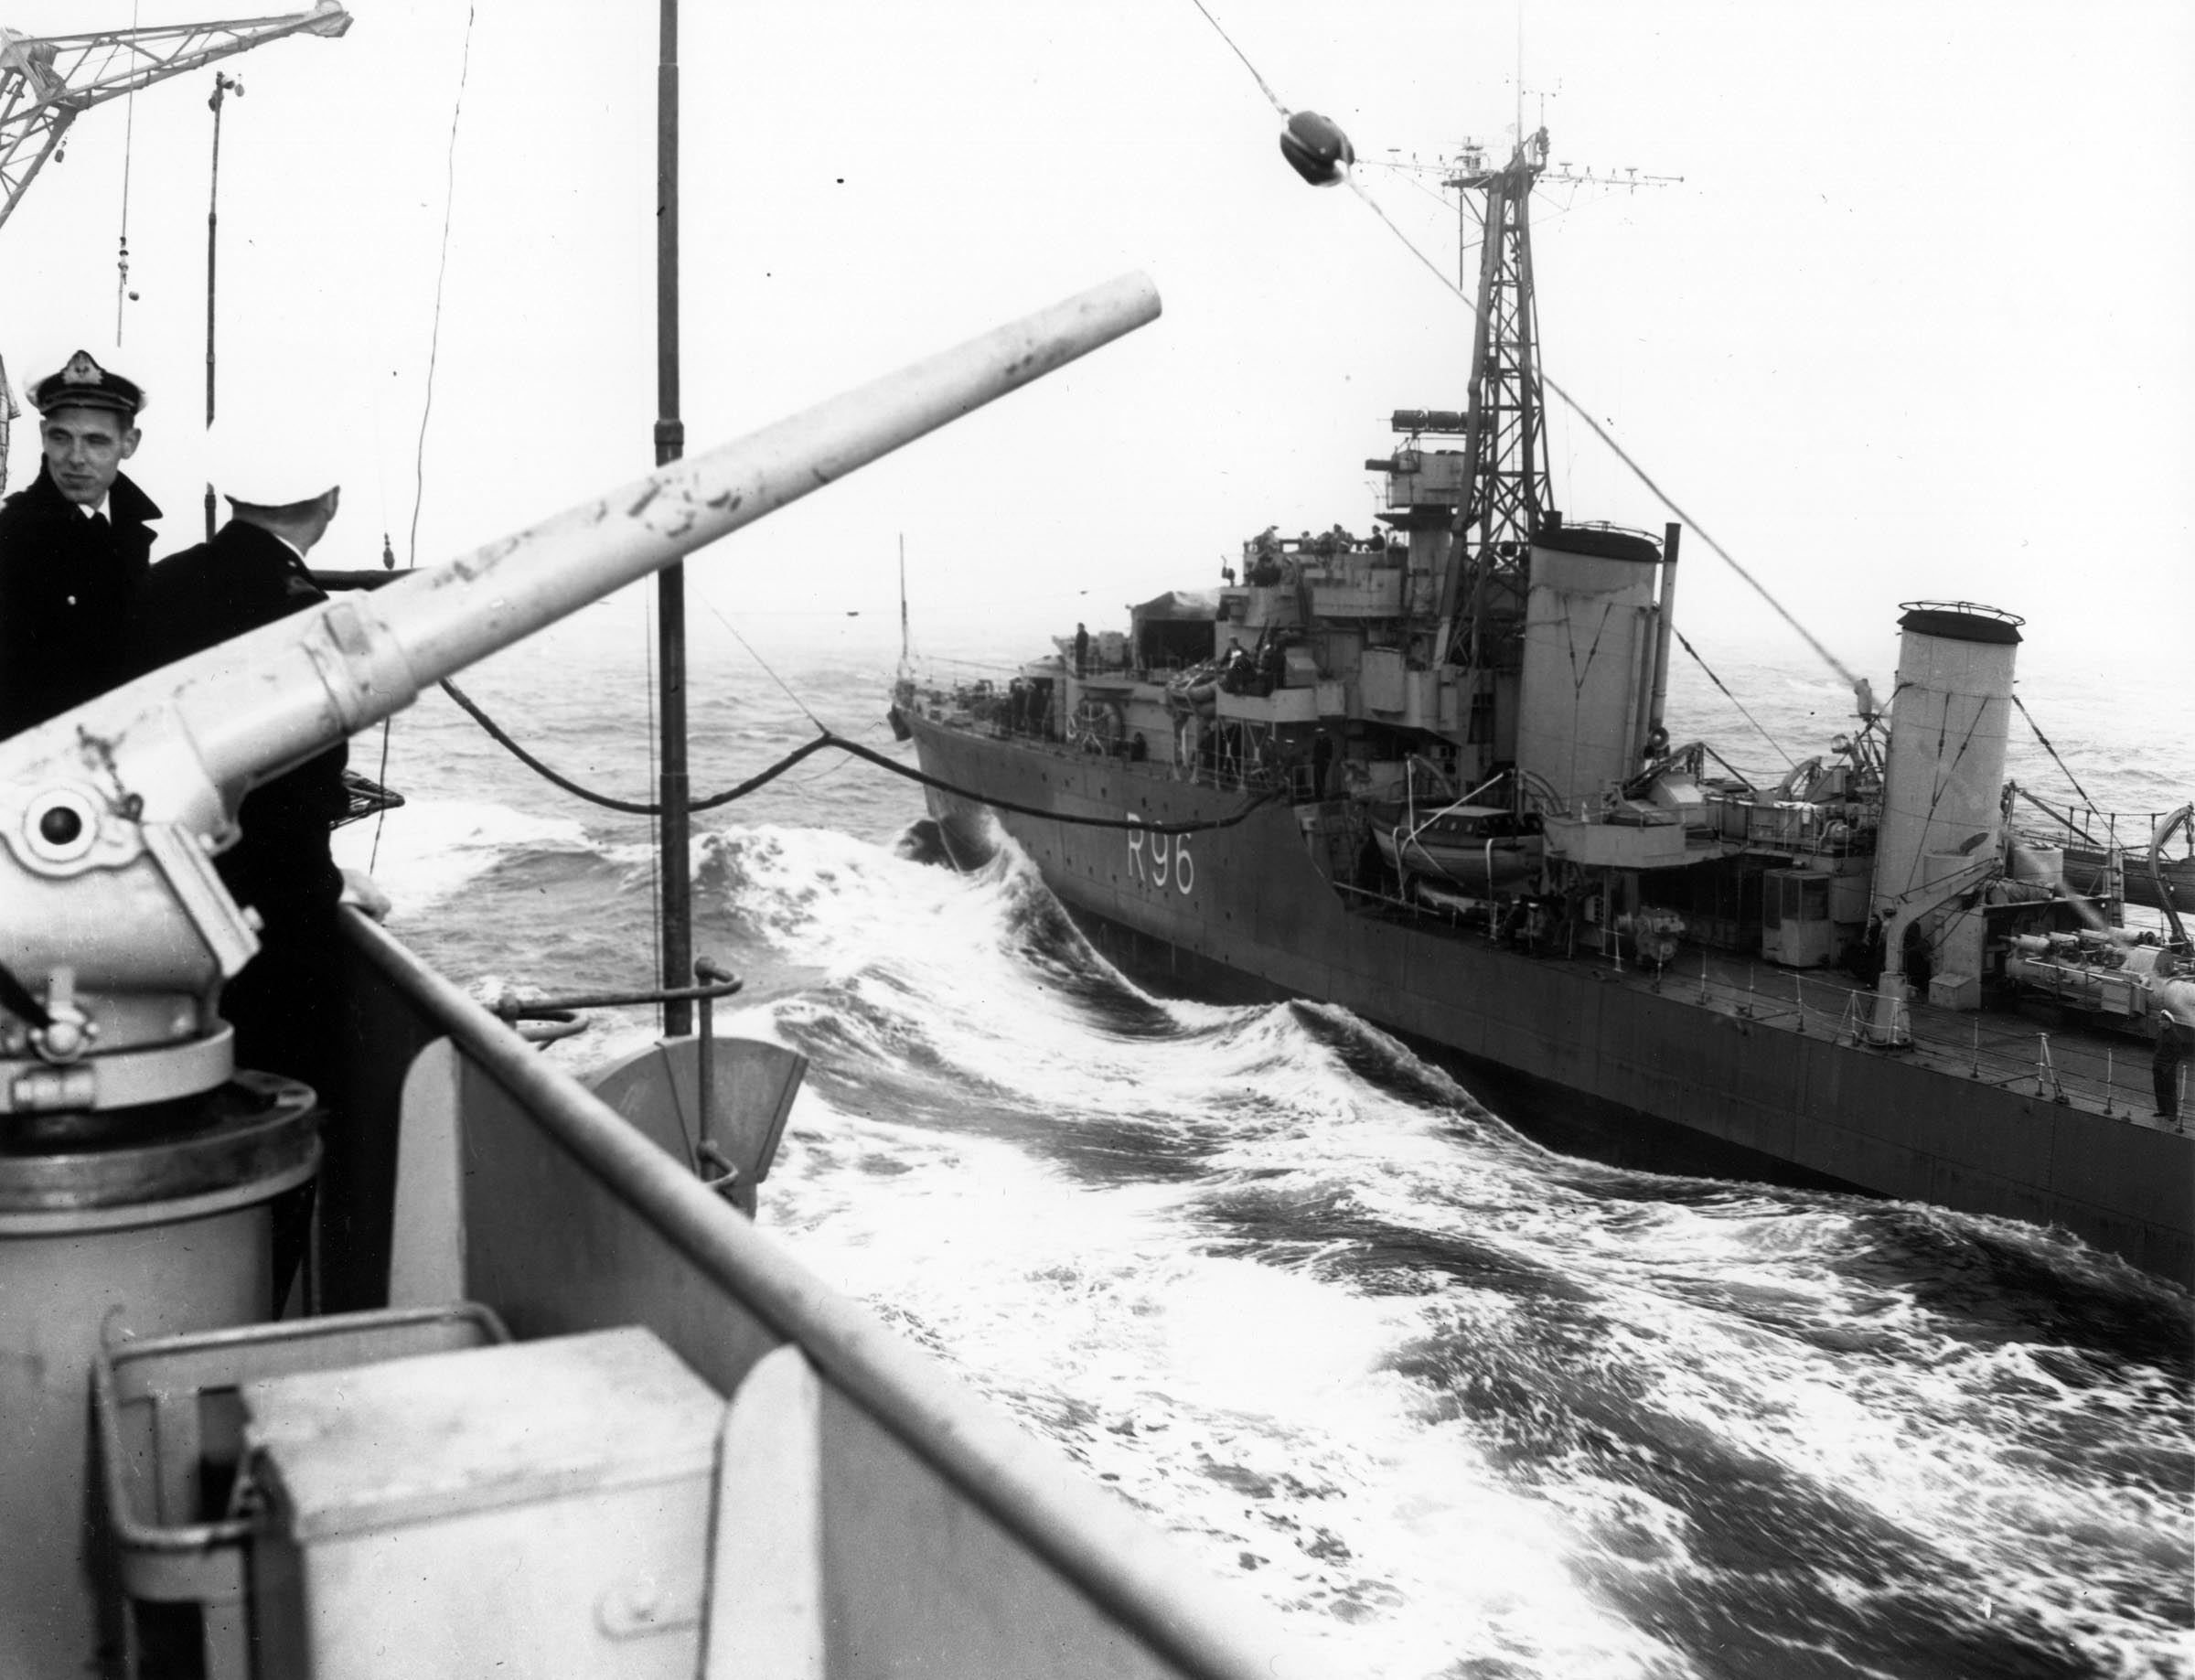 Nootka receives fuel during a replenishment at sea.